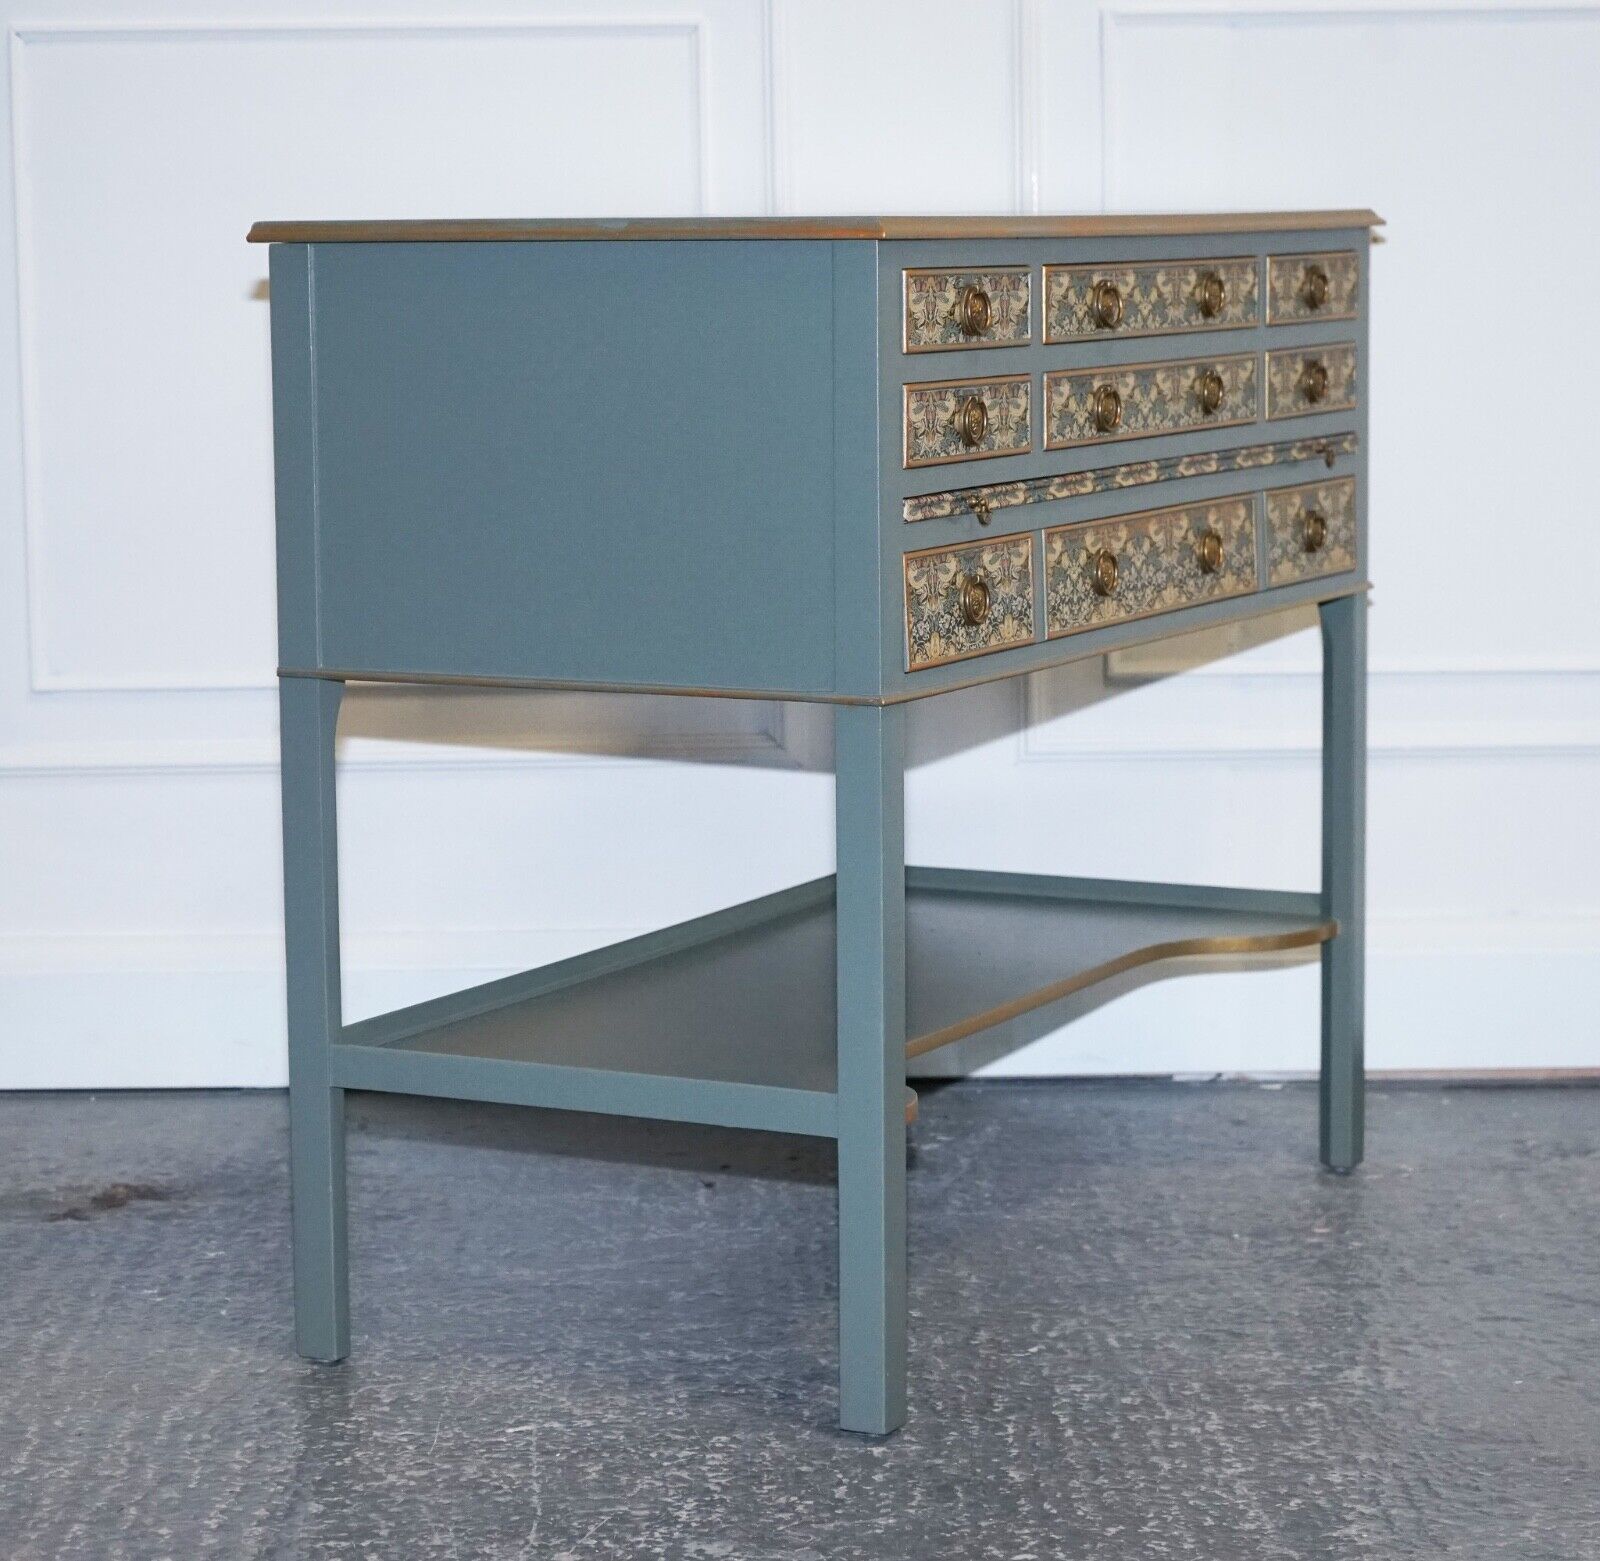 EUCALYPTUS GREEN & GOLD CONSOLE TABLE SIDEBOARD STRAWBERRY THIEF WILLIAM MORRIS